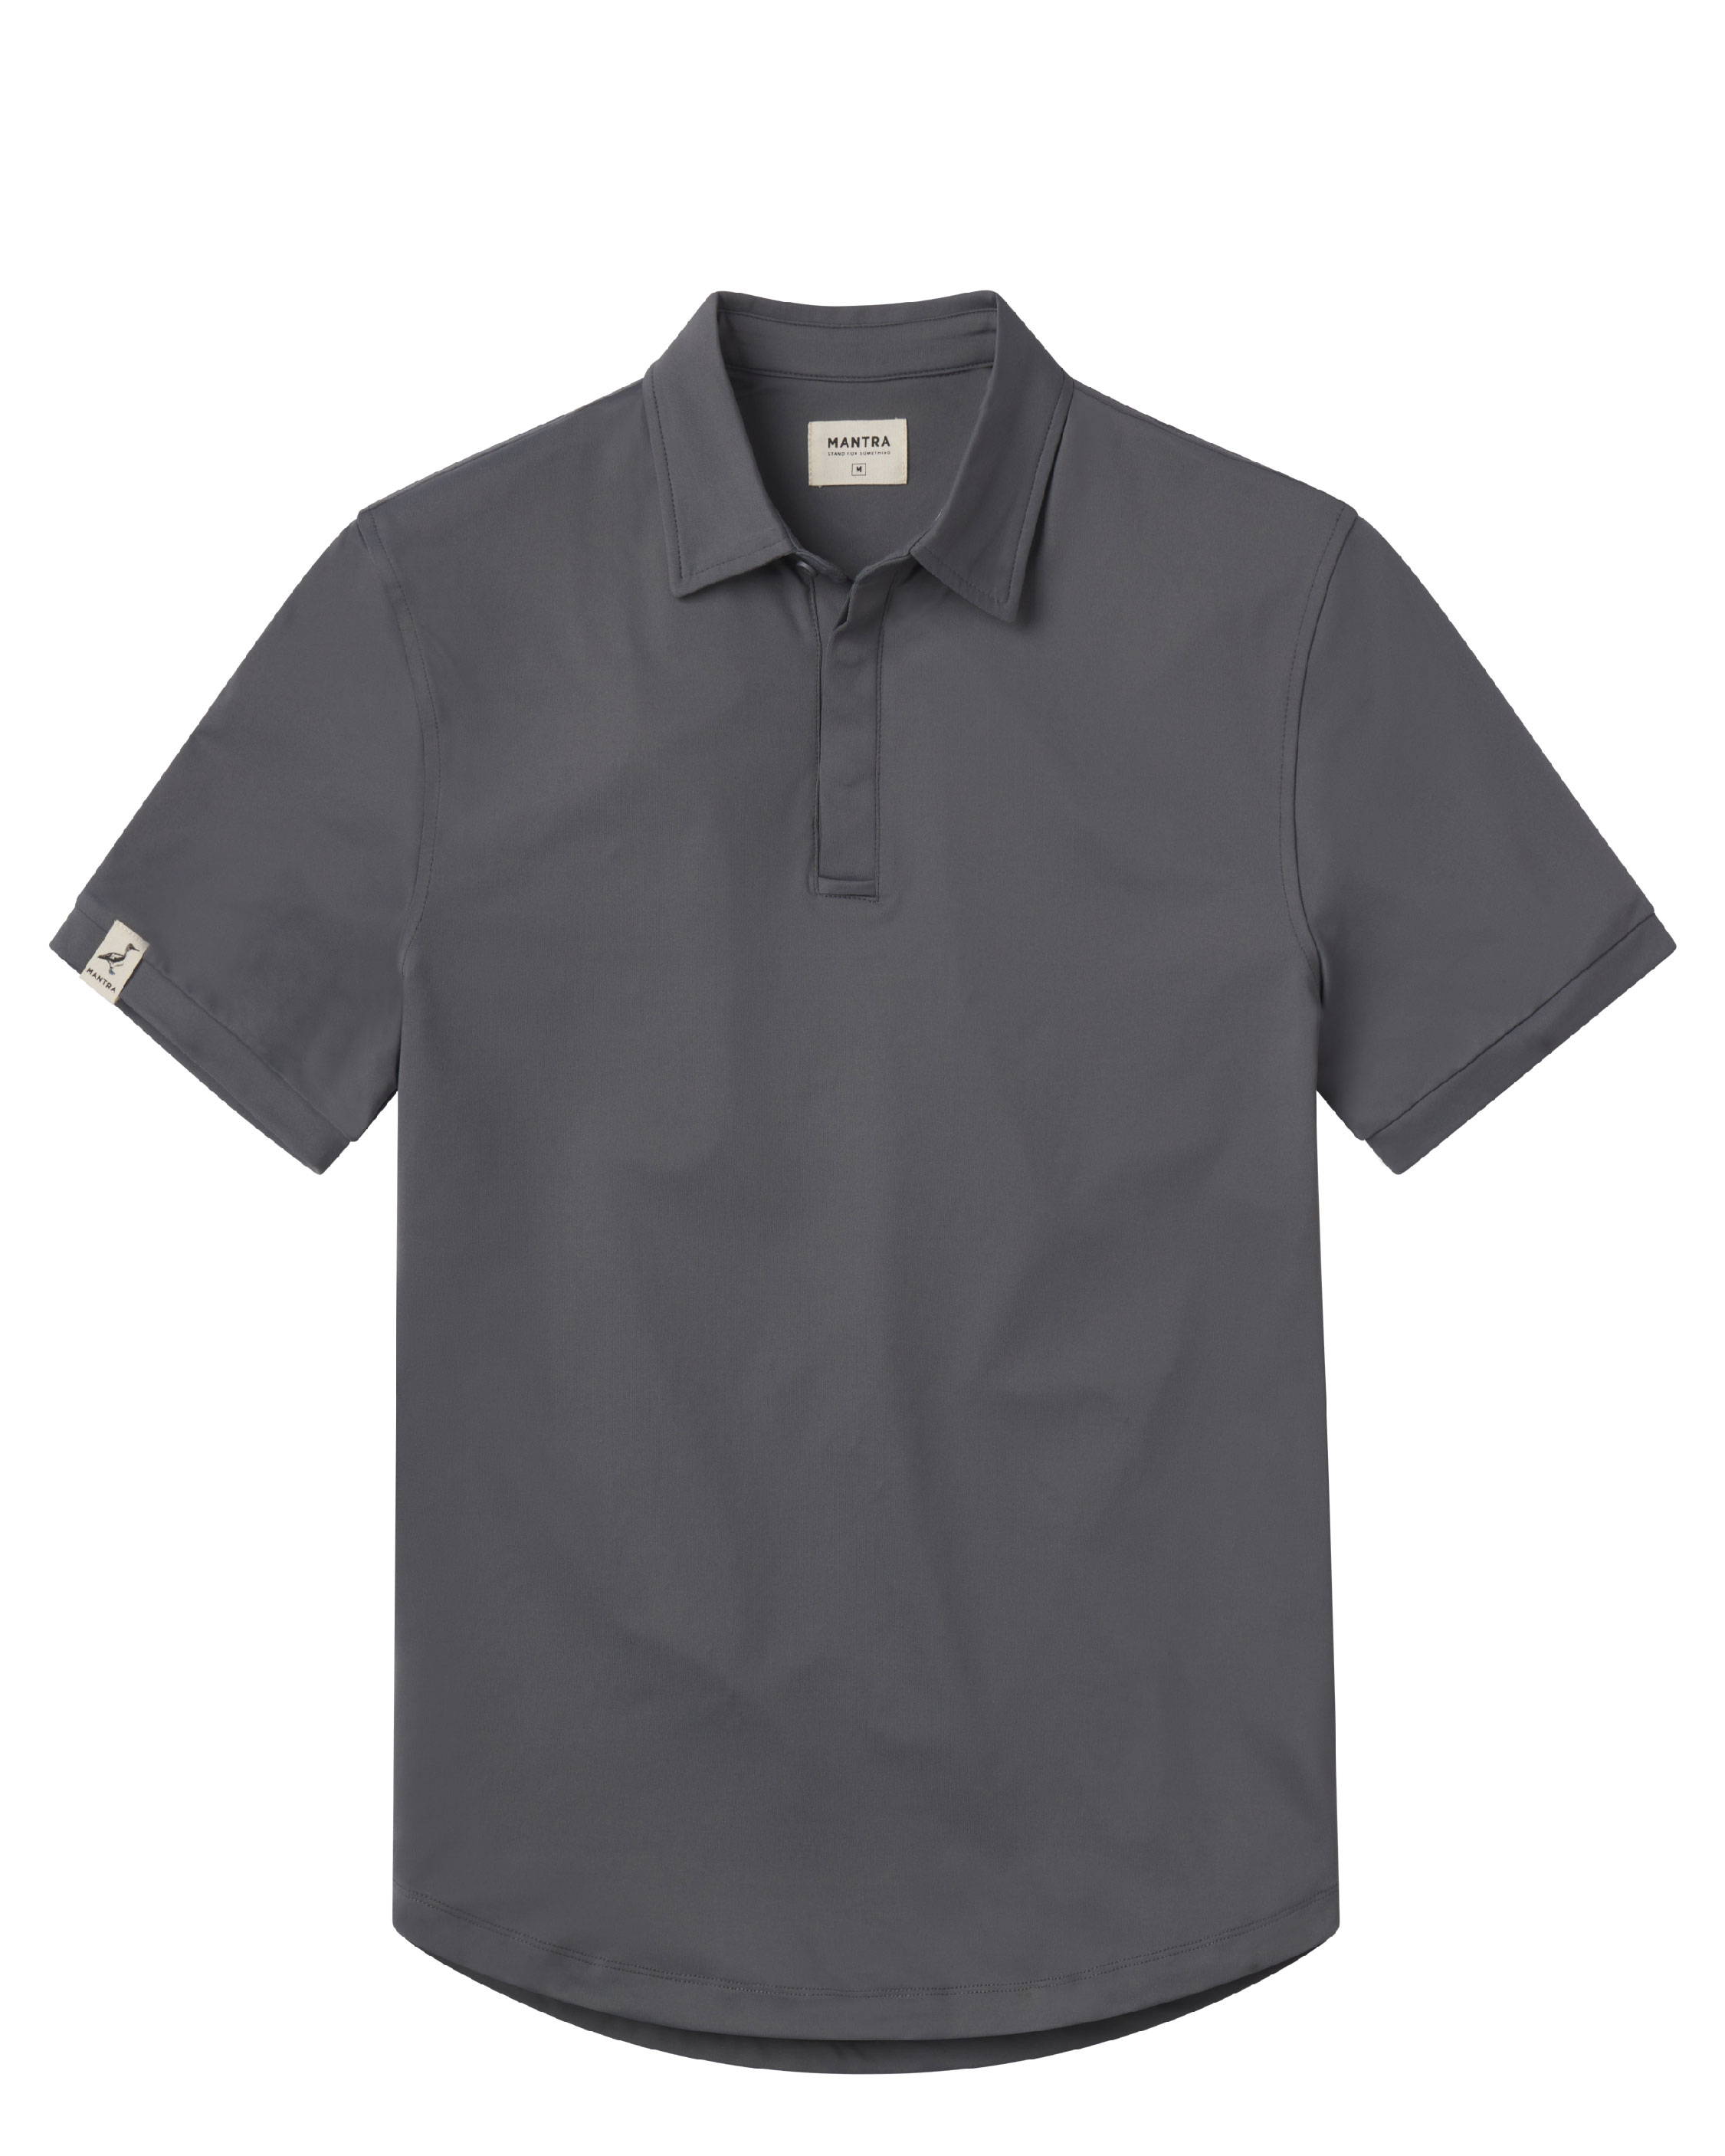 CATALYST POLO - POINT COLLAR - VOLCANIC ASH color selector